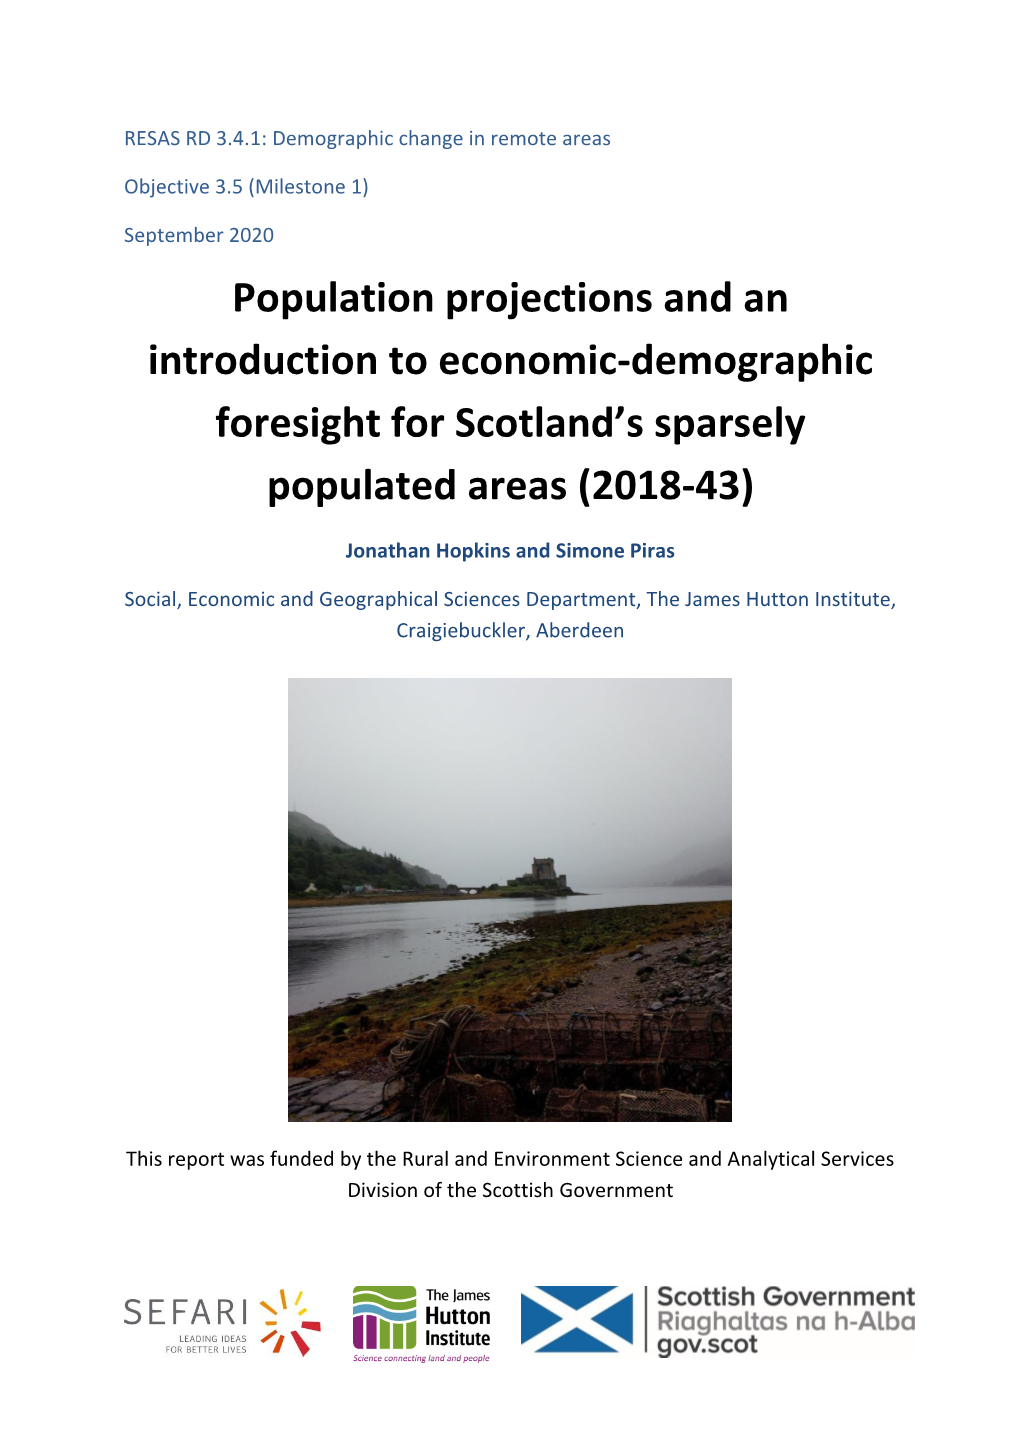 Population Projections and an Introduction to Economic-Demographic Foresight for Scotland’S Sparsely